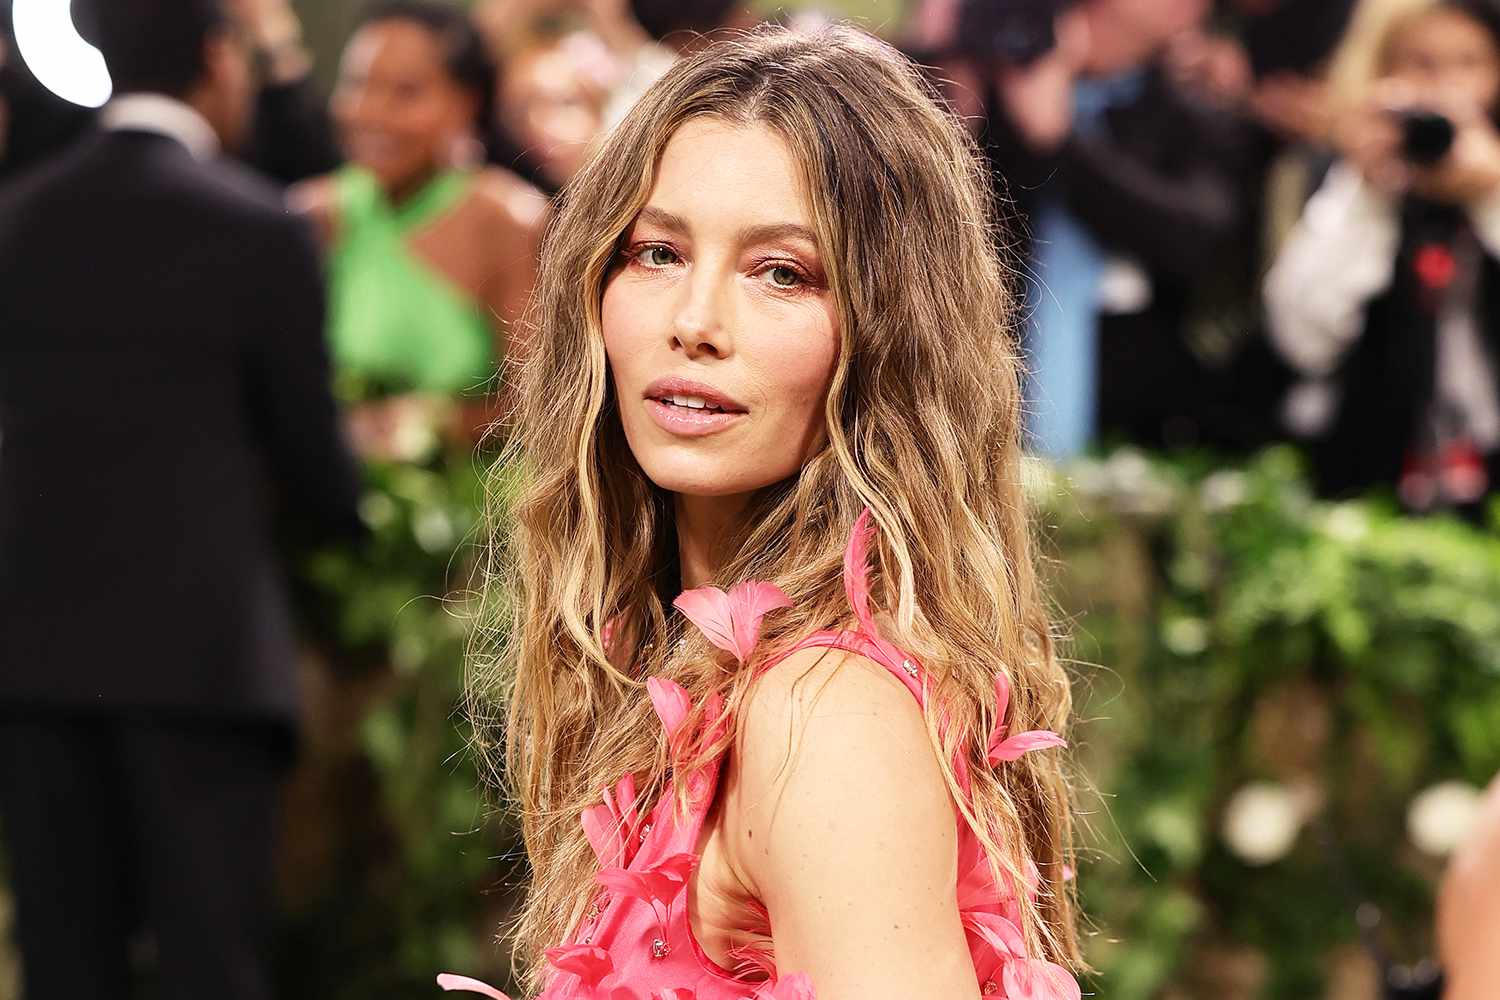 Jessica Biel Reveals 9-Year-Old Son’s Reaction After Reading Her Book About Periods: ‘He Was So Cool About...